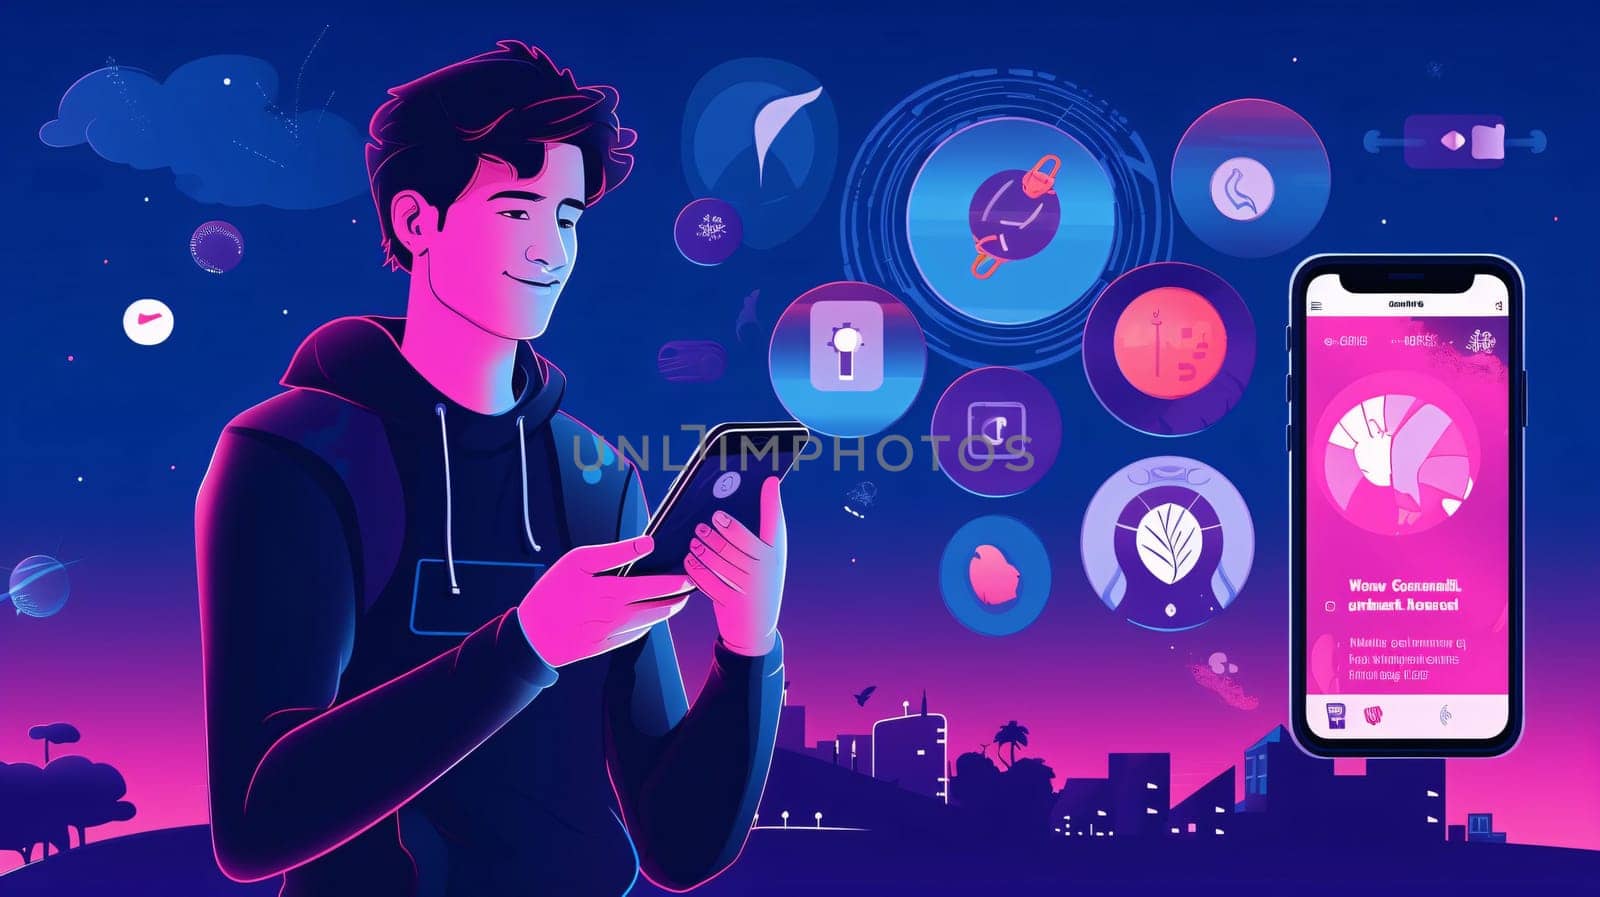 Vector illustration of a young man with a smartphone in his hands. by ThemesS